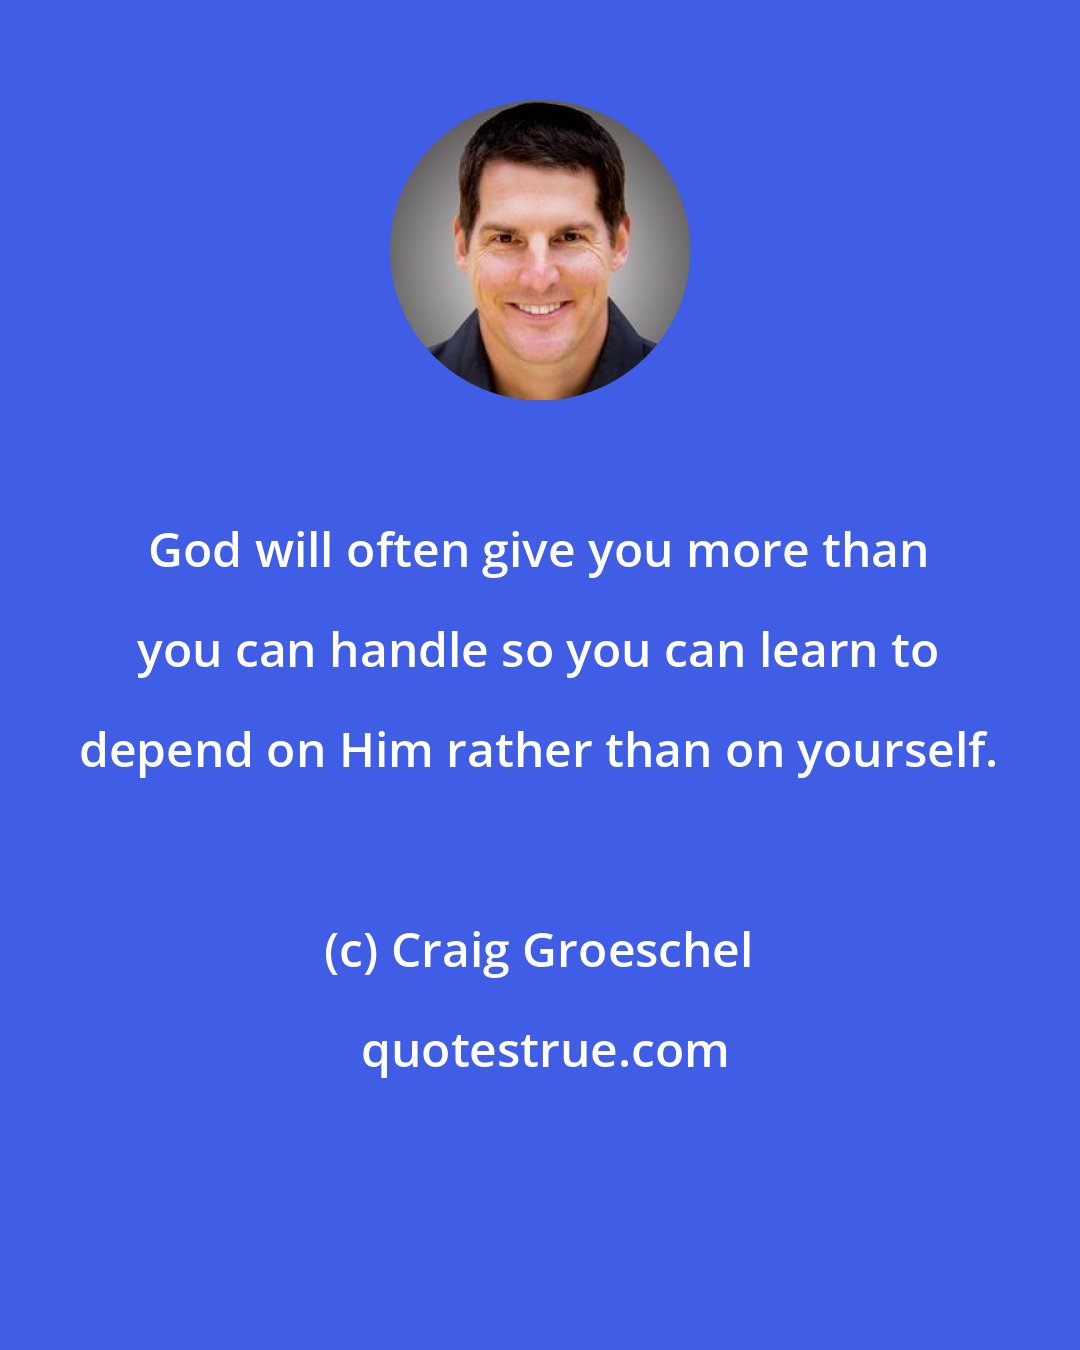 Craig Groeschel: God will often give you more than you can handle so you can learn to depend on Him rather than on yourself.